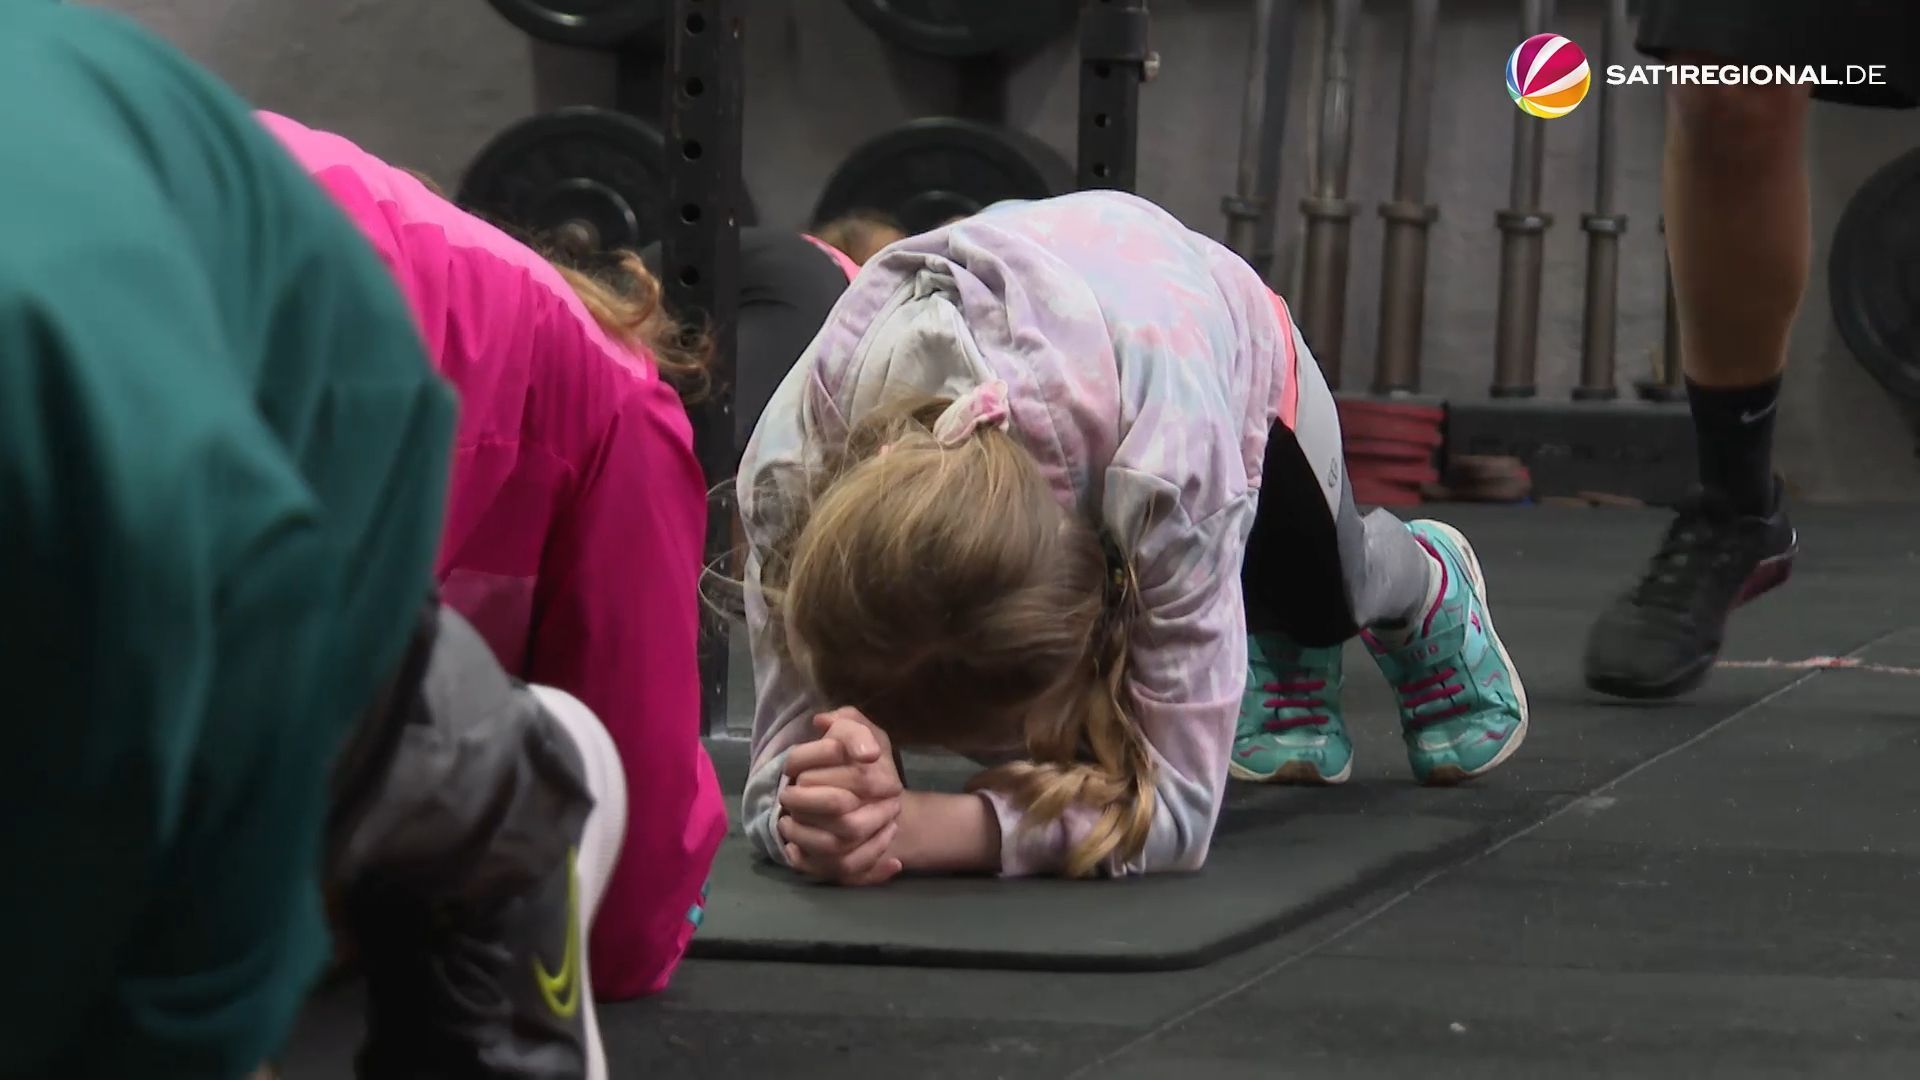 Crossfit workout: kids go to the limit at sport in Flensburg